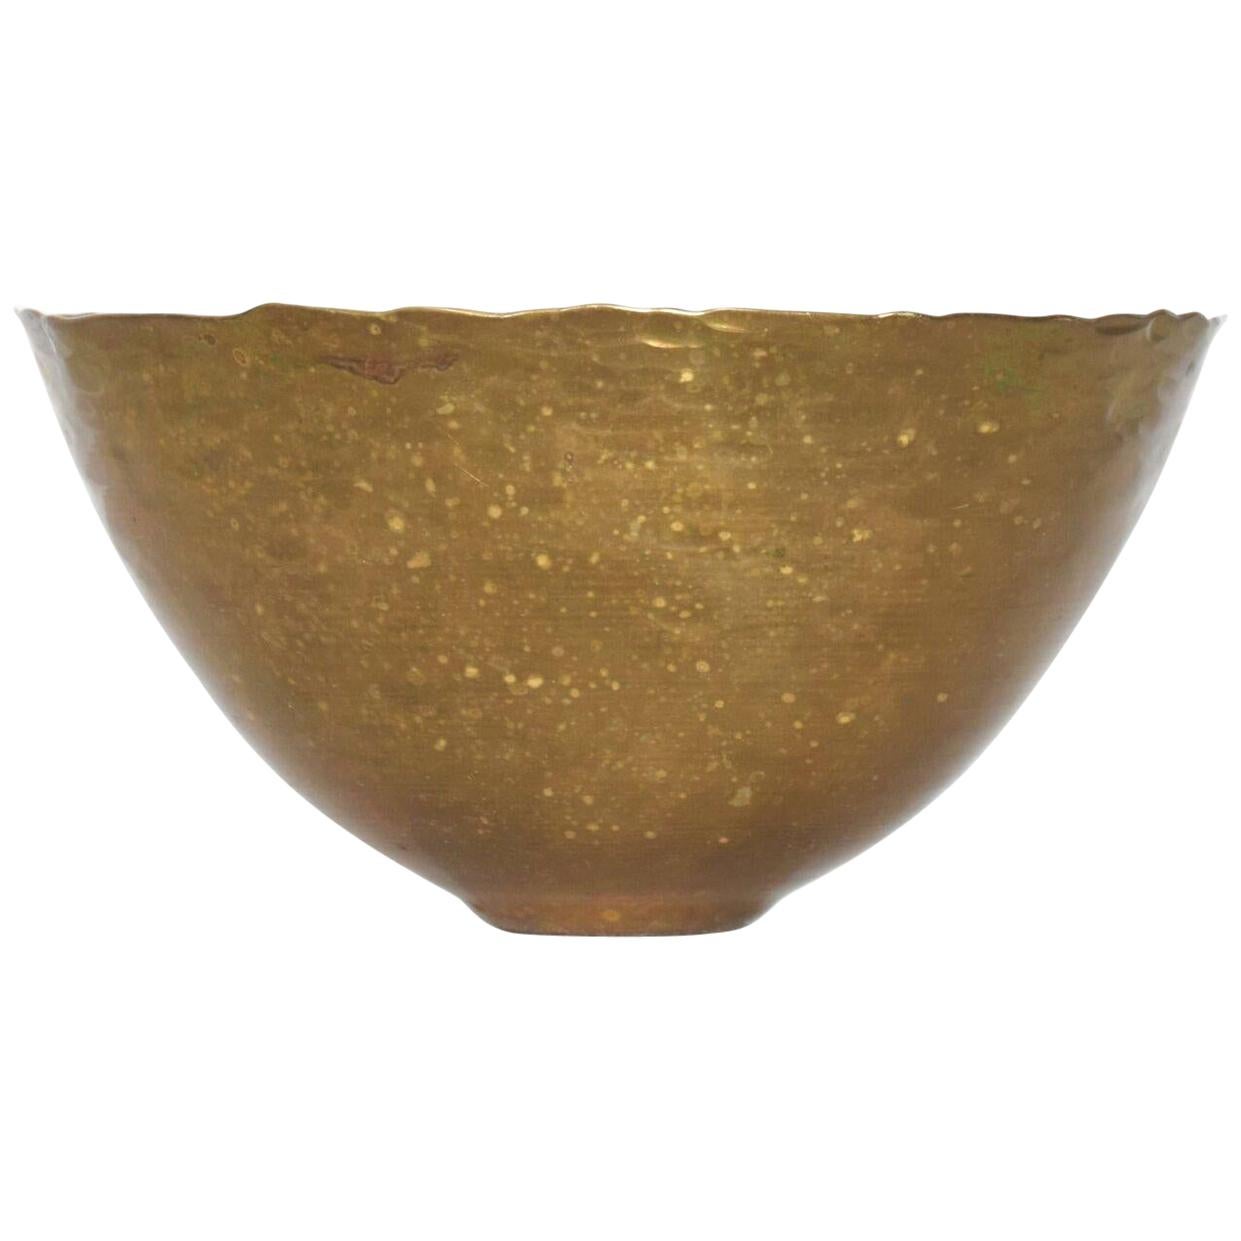 AMBIANIC presents
Decorative Hand Hammered Scalloped Speckled Brass Bowl by Fairthorne Studios Canada 1994
Dimensions: 3 H x 6 in diameter.
Handcrafted, signed underneath.
Vintage item preowned vintage condition, review images provided.
 